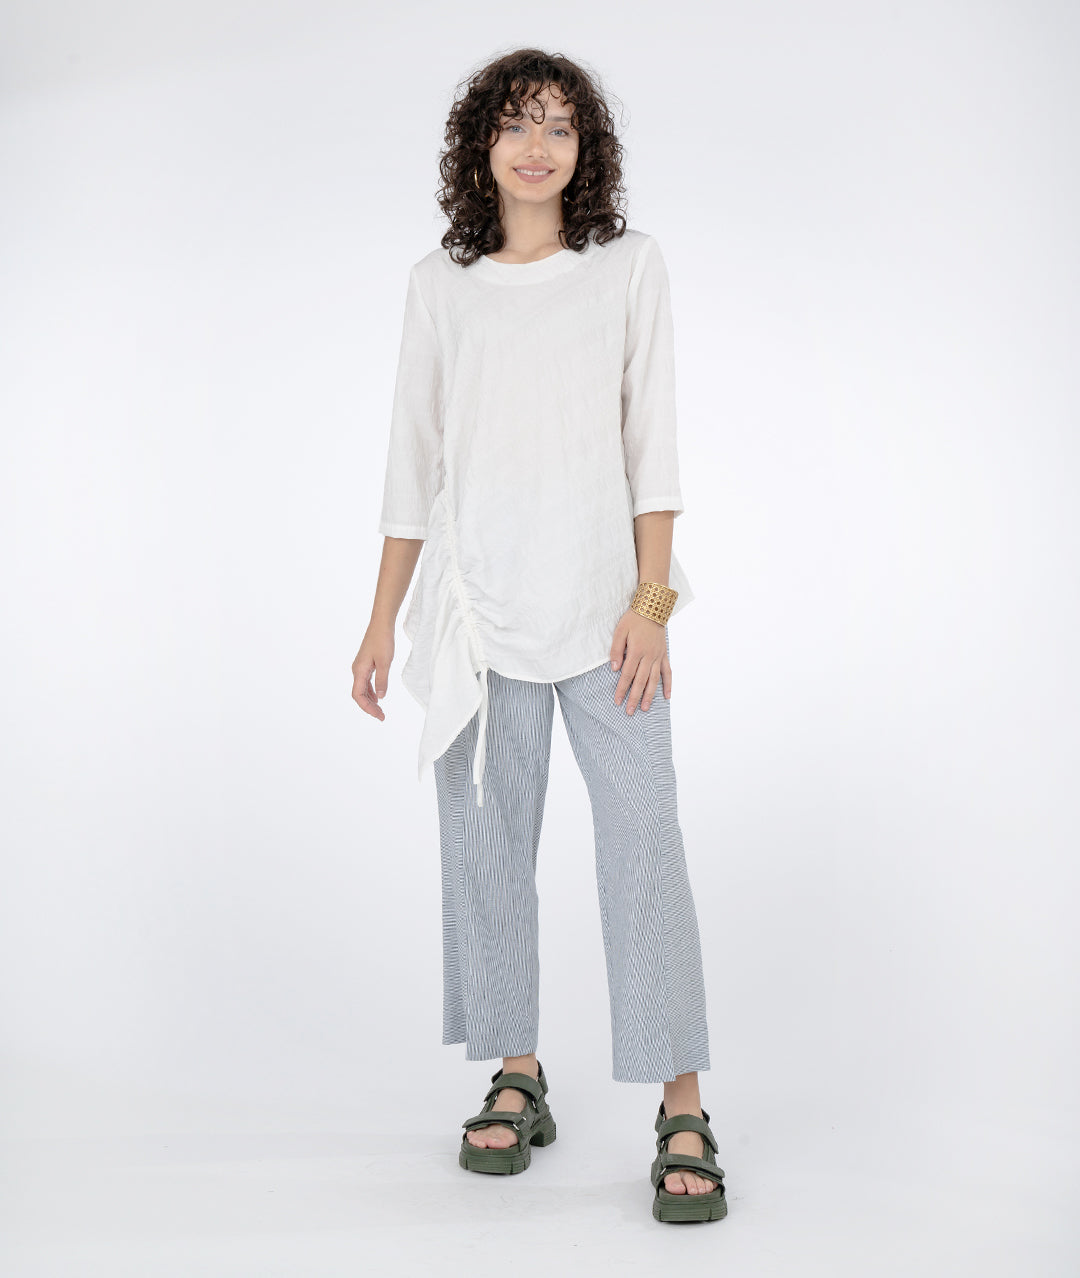 model in a bule and white pinstriped pant with an asymmetrical white top with a gathered detail on the longer side and 3/4 sleeves